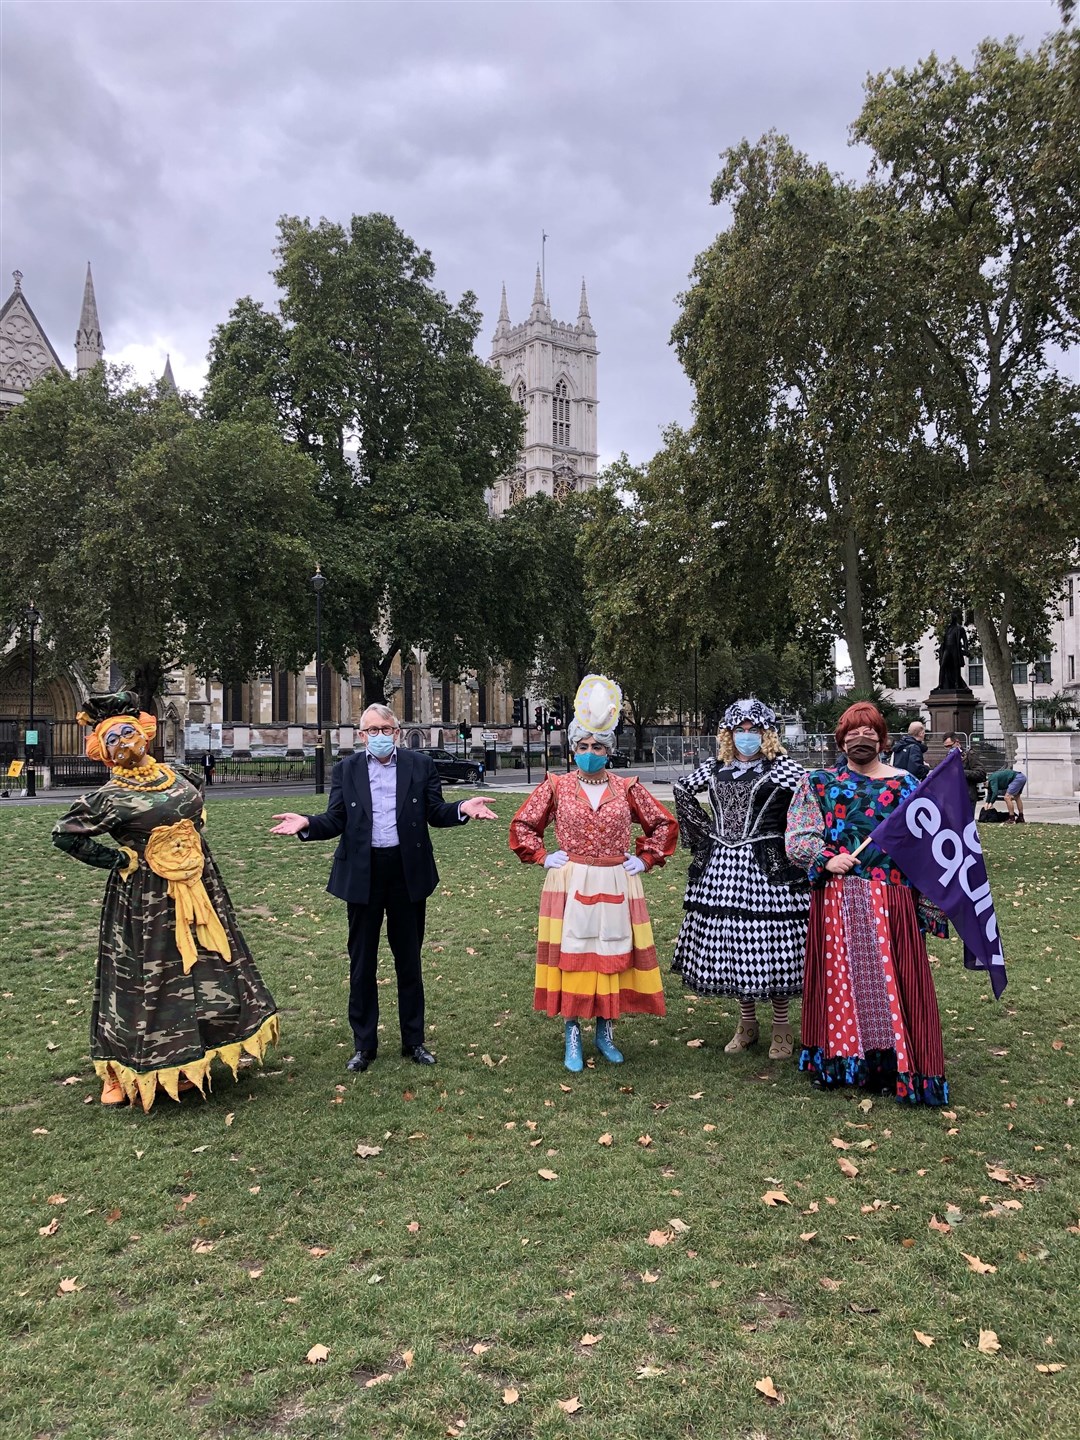 MP Jamie Stone with some fo the protesting panto dames in Parliament Square.